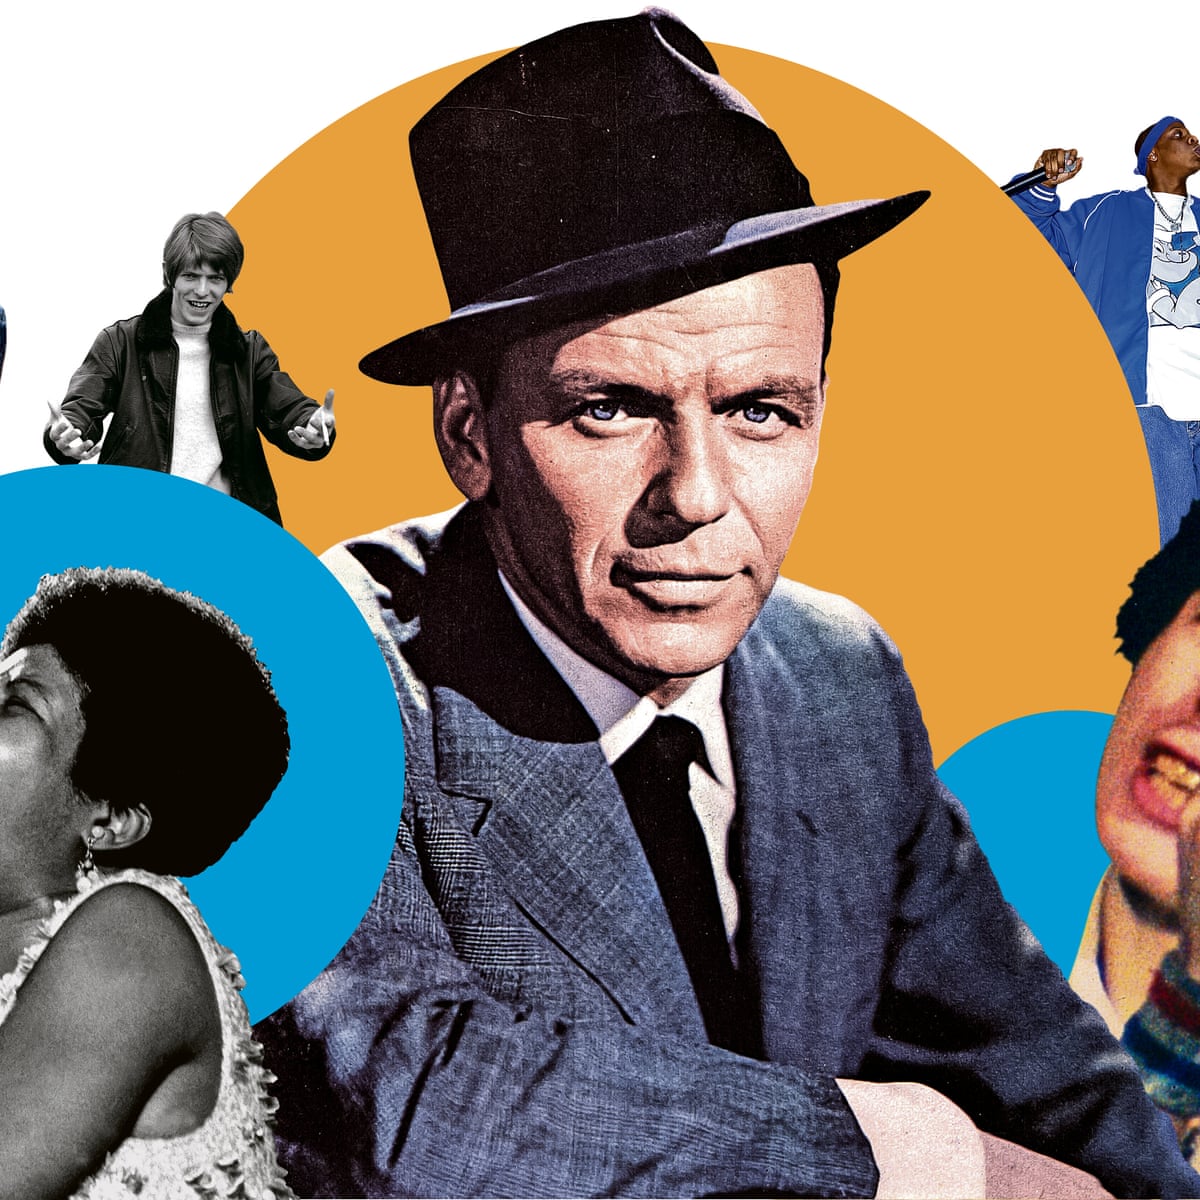 People Who Sing It Want The World To Know They Exist 50 Years Of My Way Frank Sinatra The Guardian